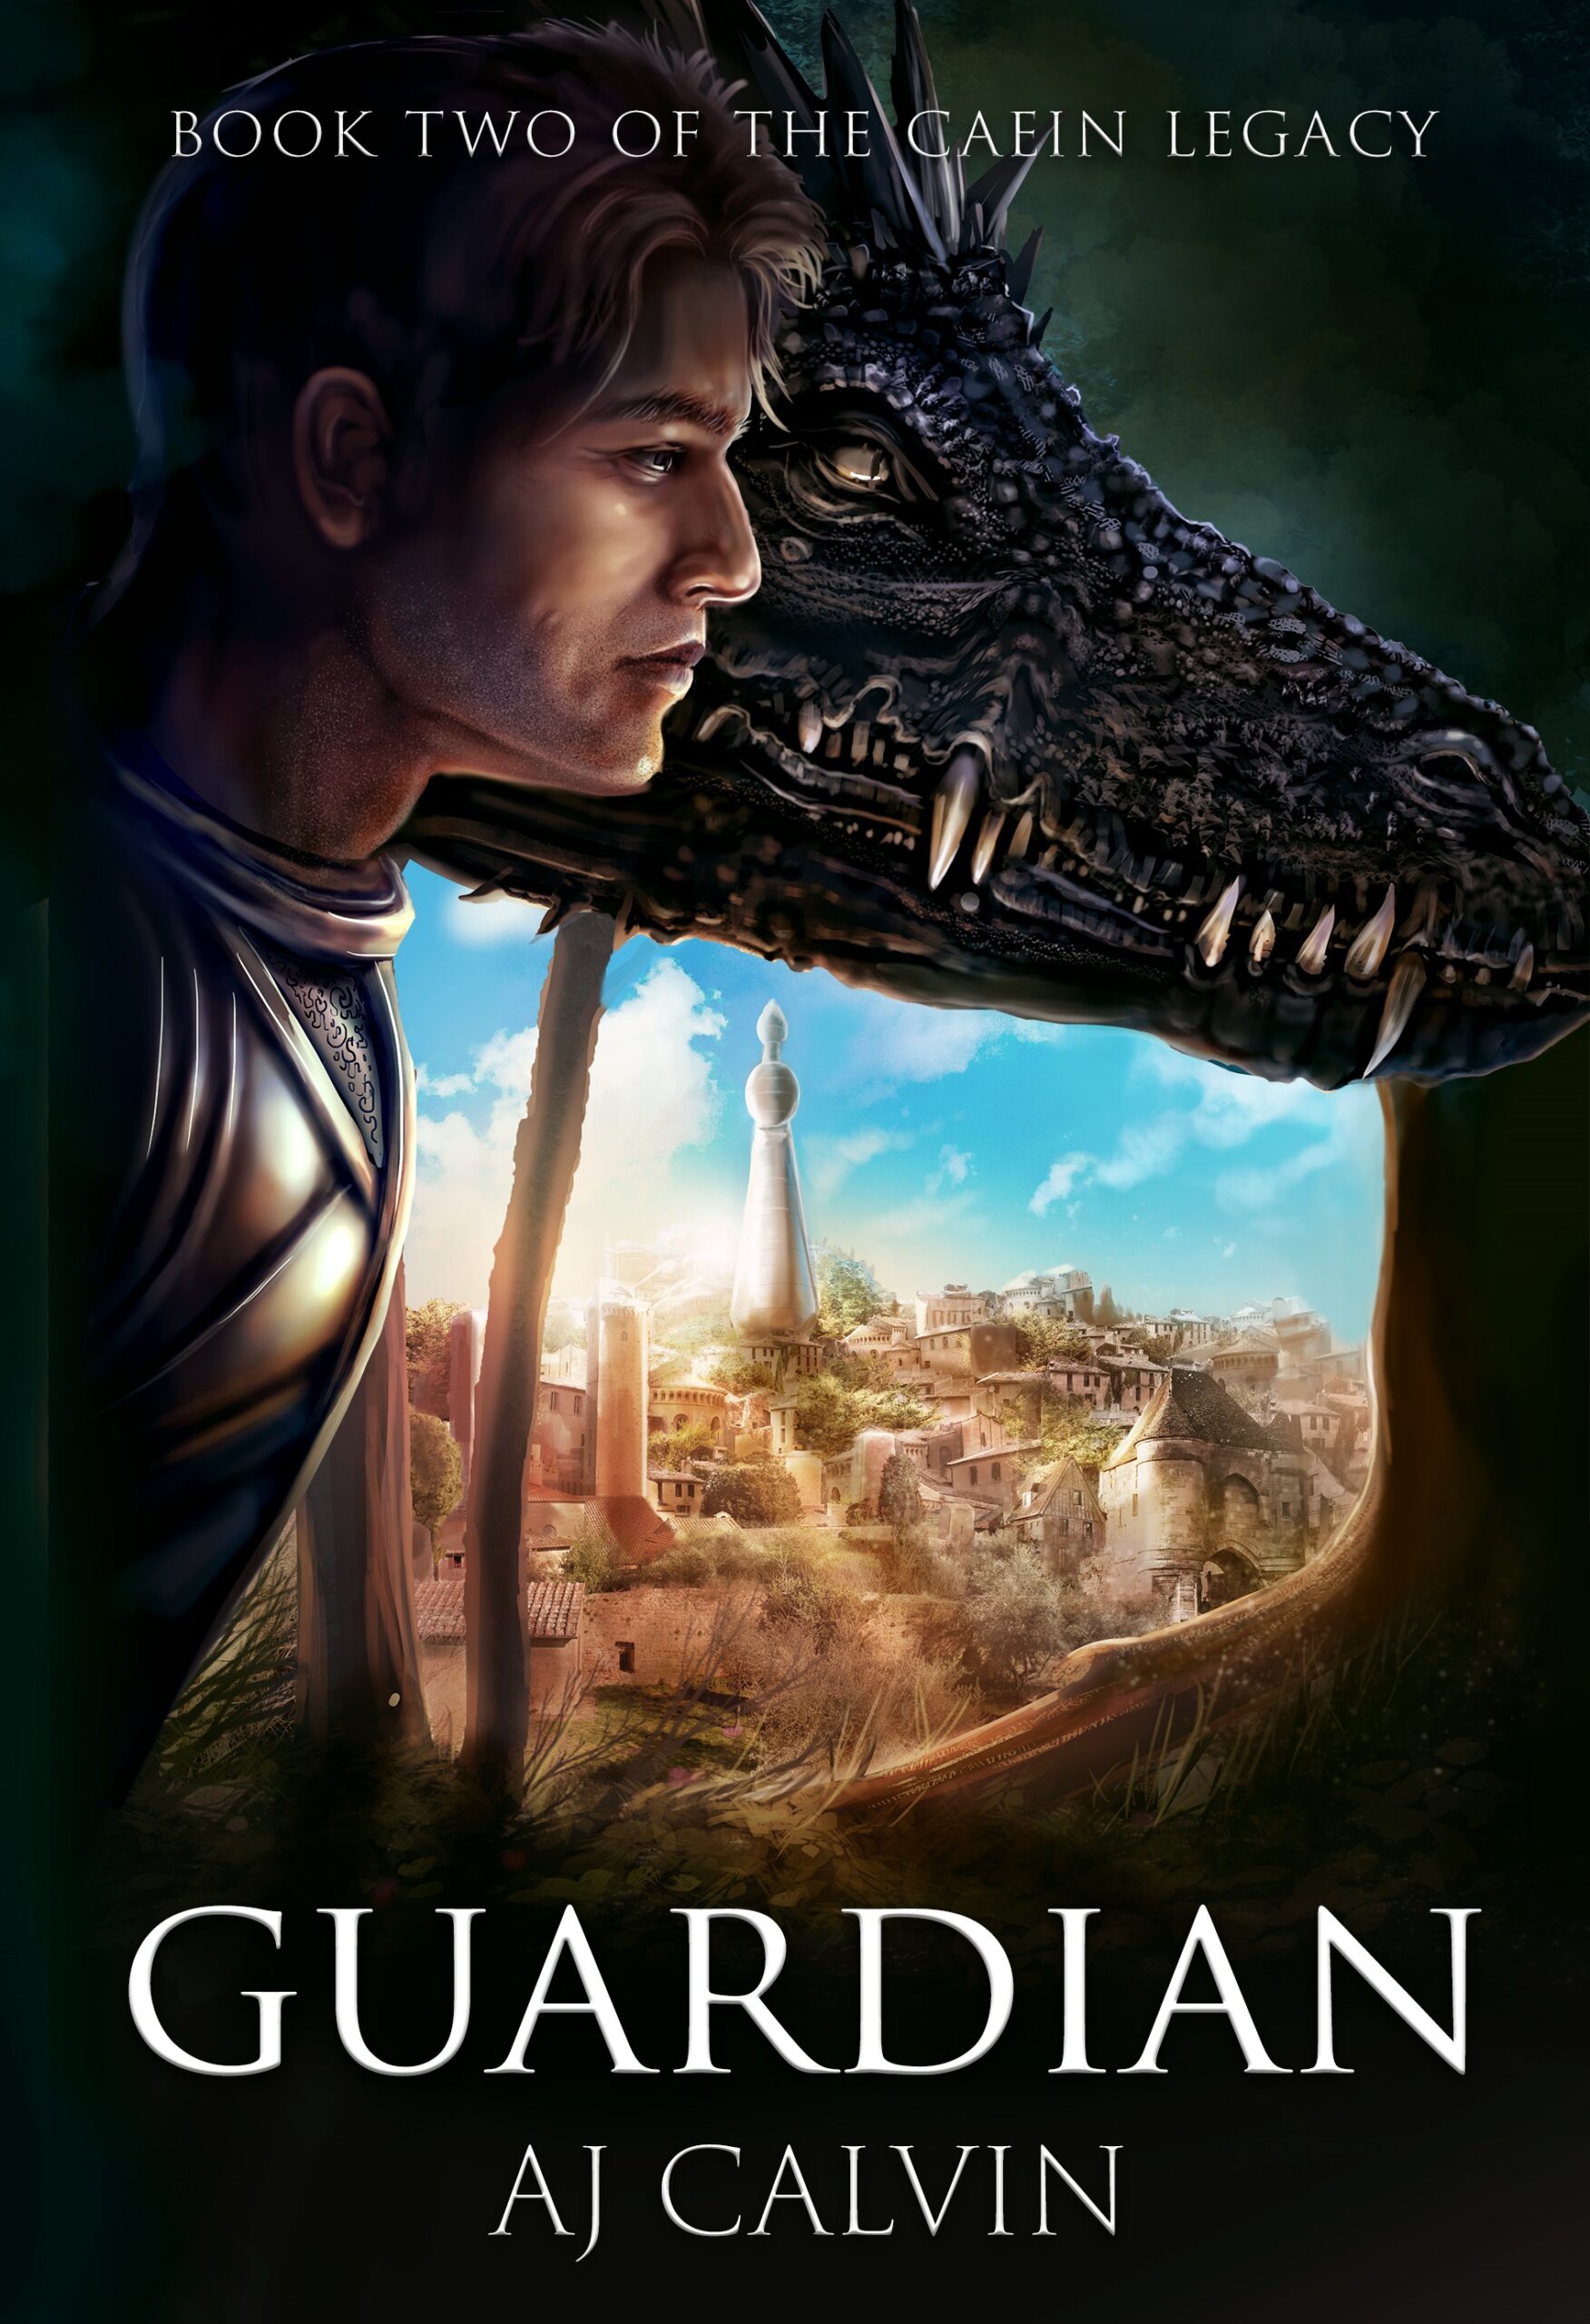 Guardian is now available!